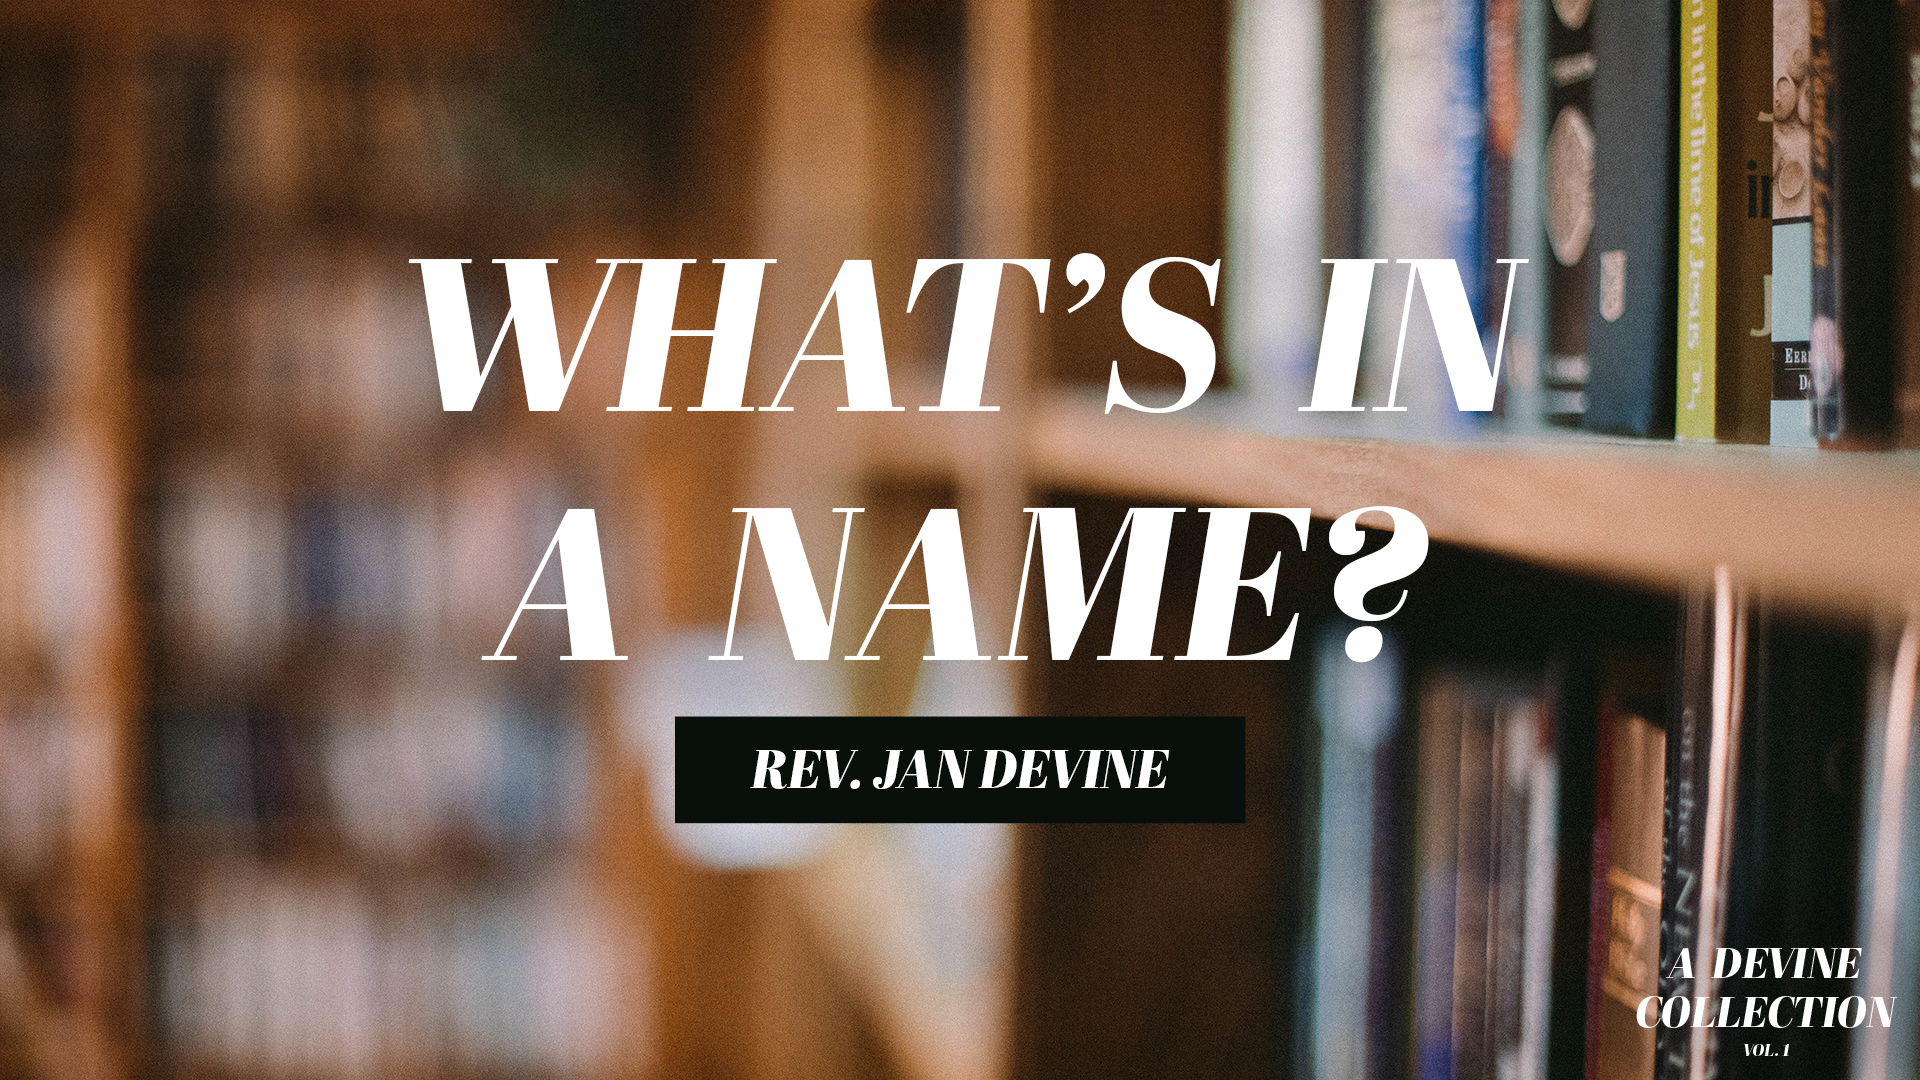 What's In a Name? Image